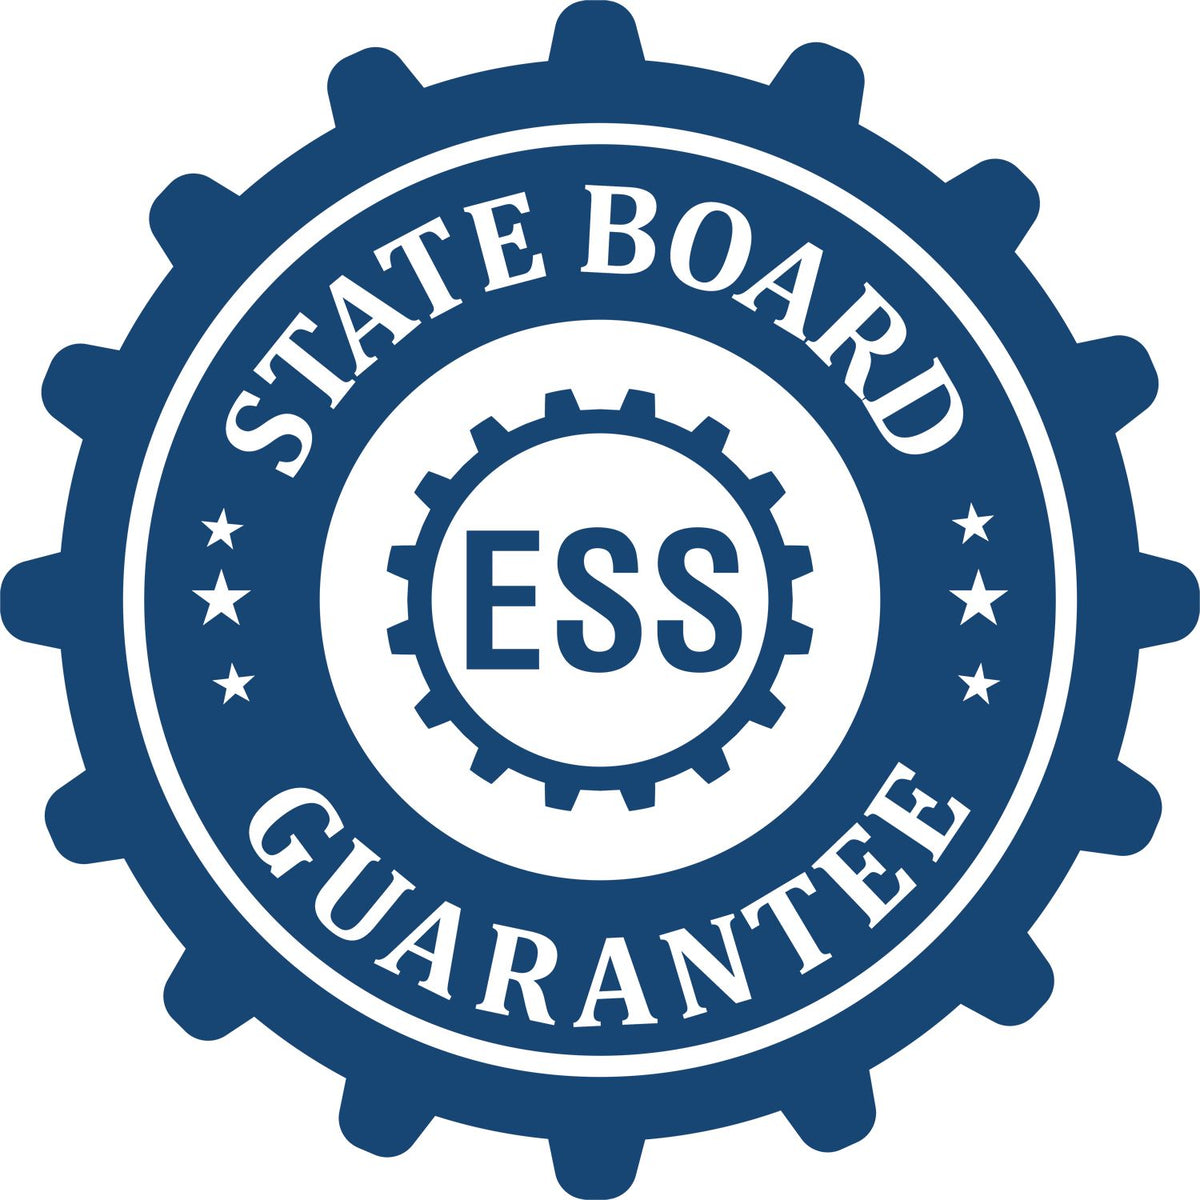 An emblem in a gear shape illustrating a state board guarantee for the Heavy Duty Cast Iron Idaho Architect Embosser product.